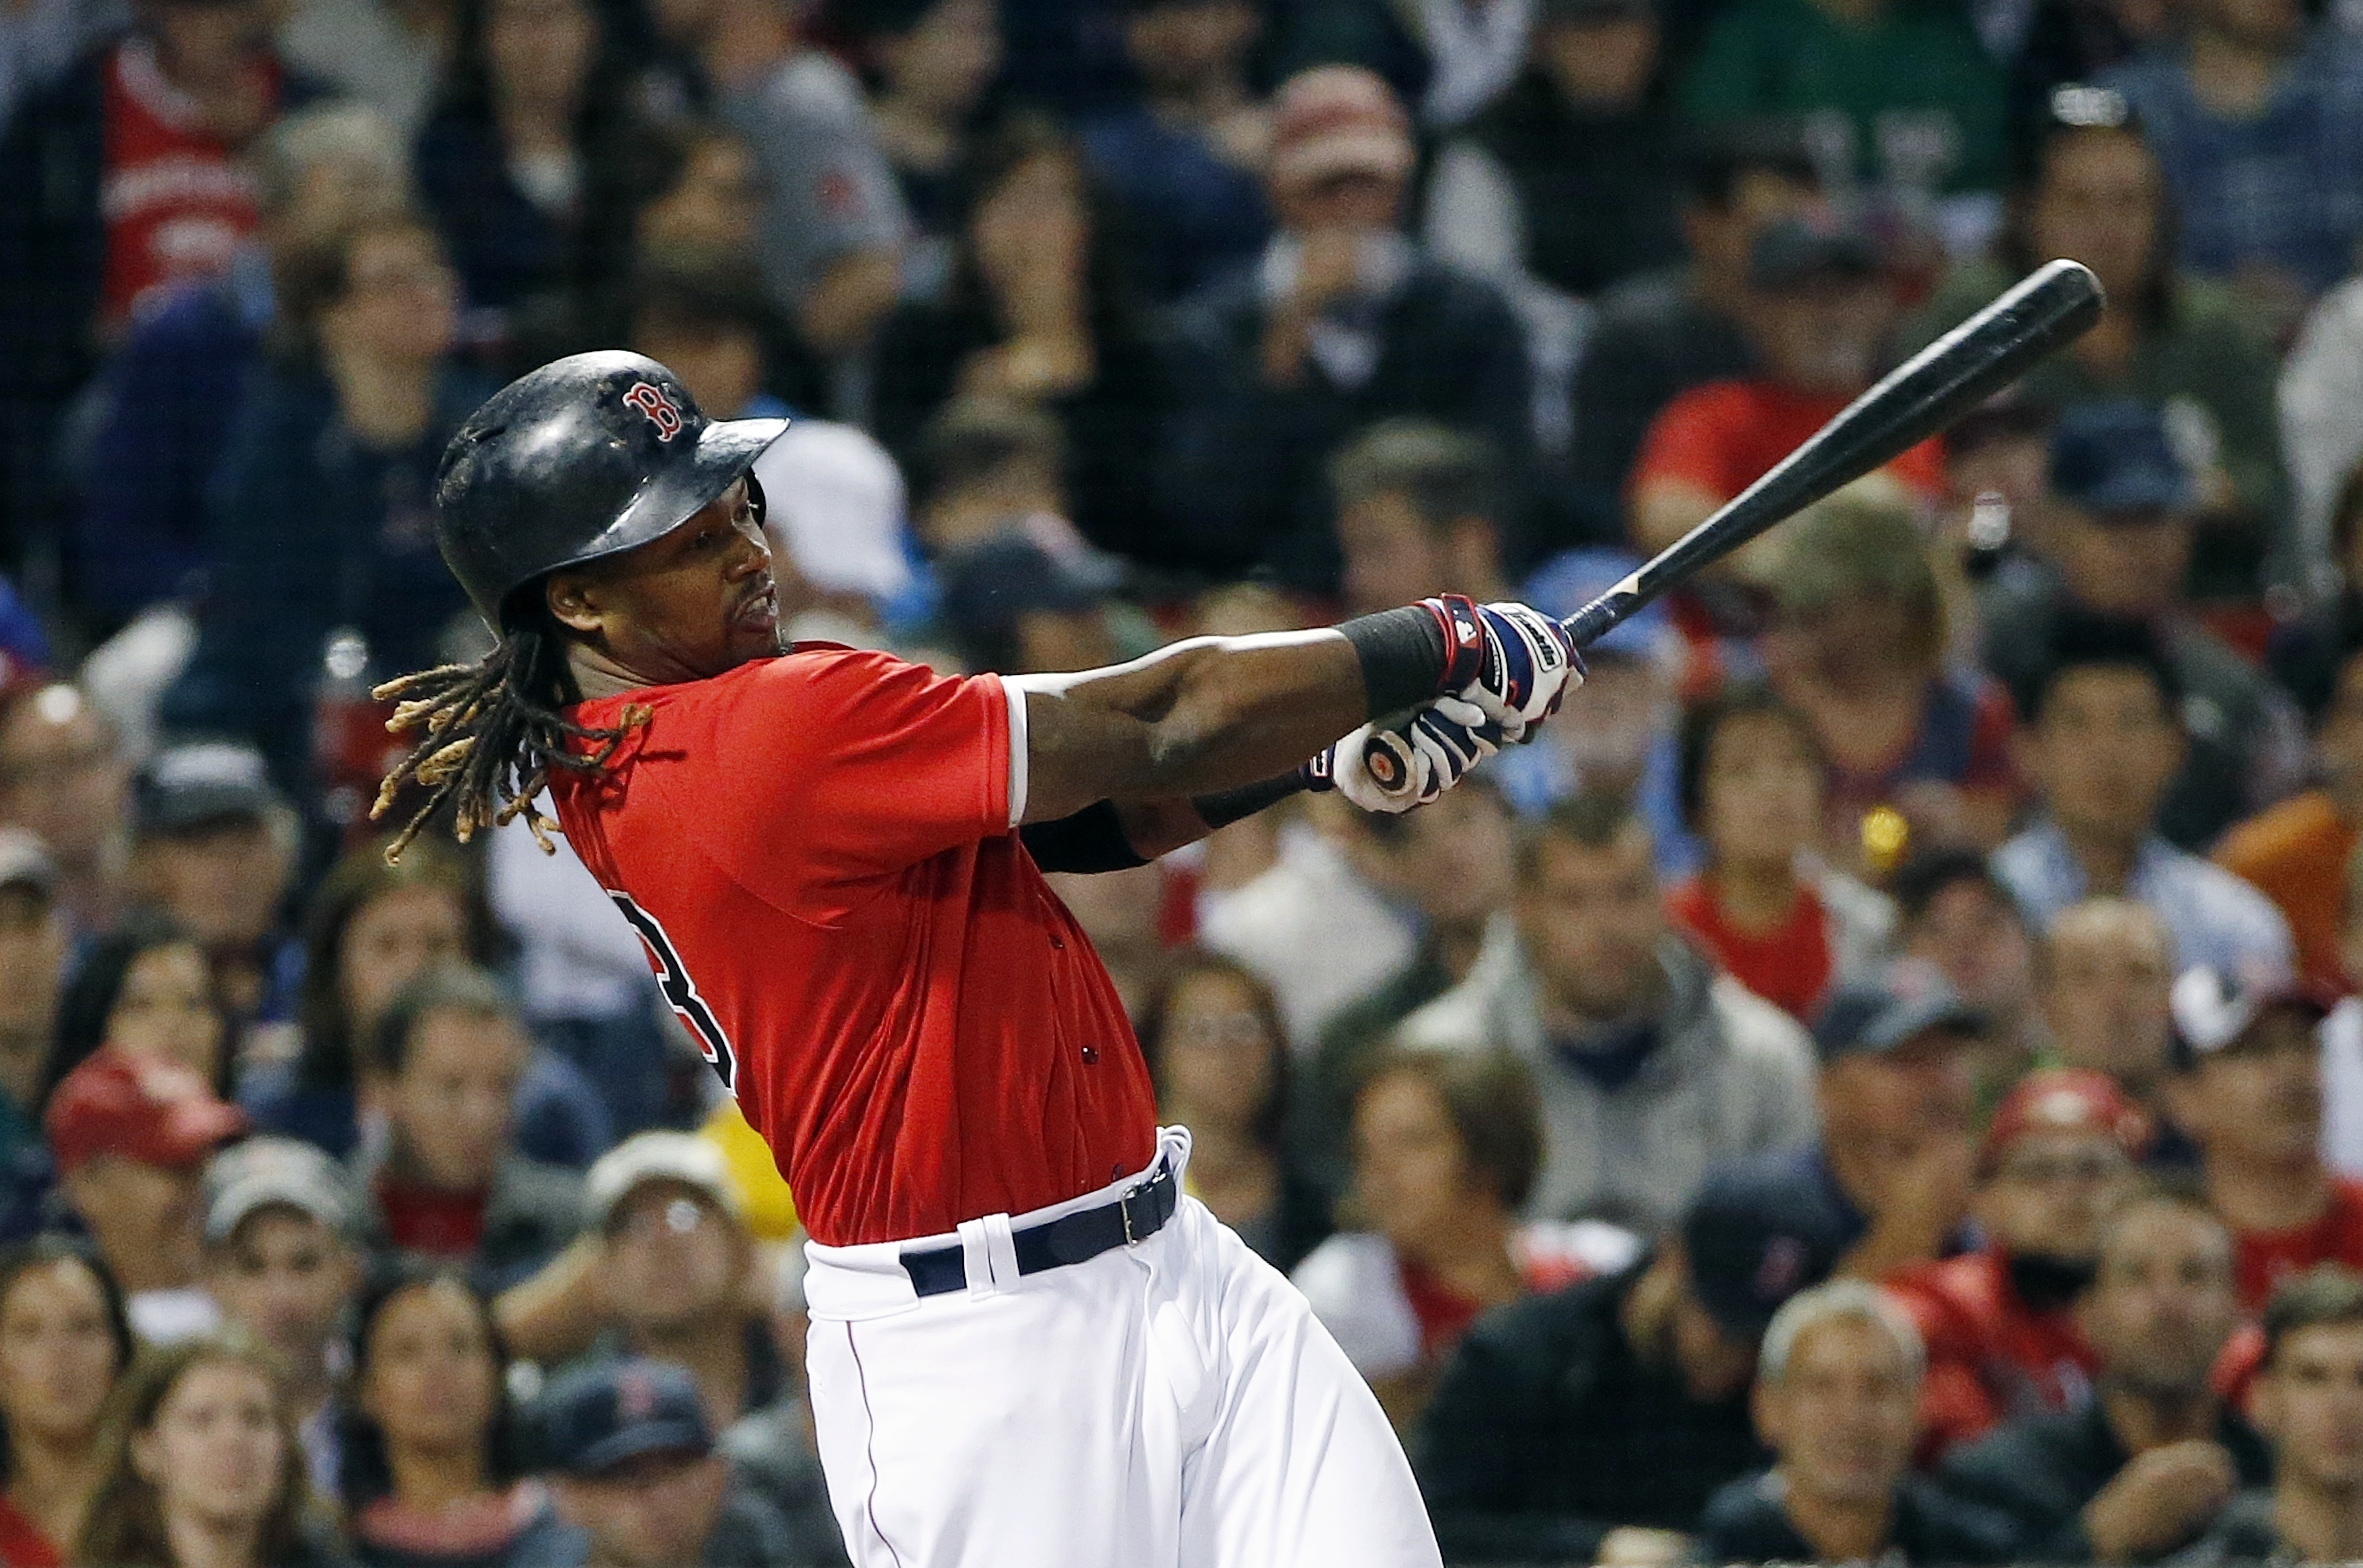 Boston Red Sox's Hanley Ramirez follows through on his solo home run during the fourth inning of a baseball game against the New York Yankees in Boston, Friday, Sept. 16, 2016. (AP Photo/Michael Dwyer)